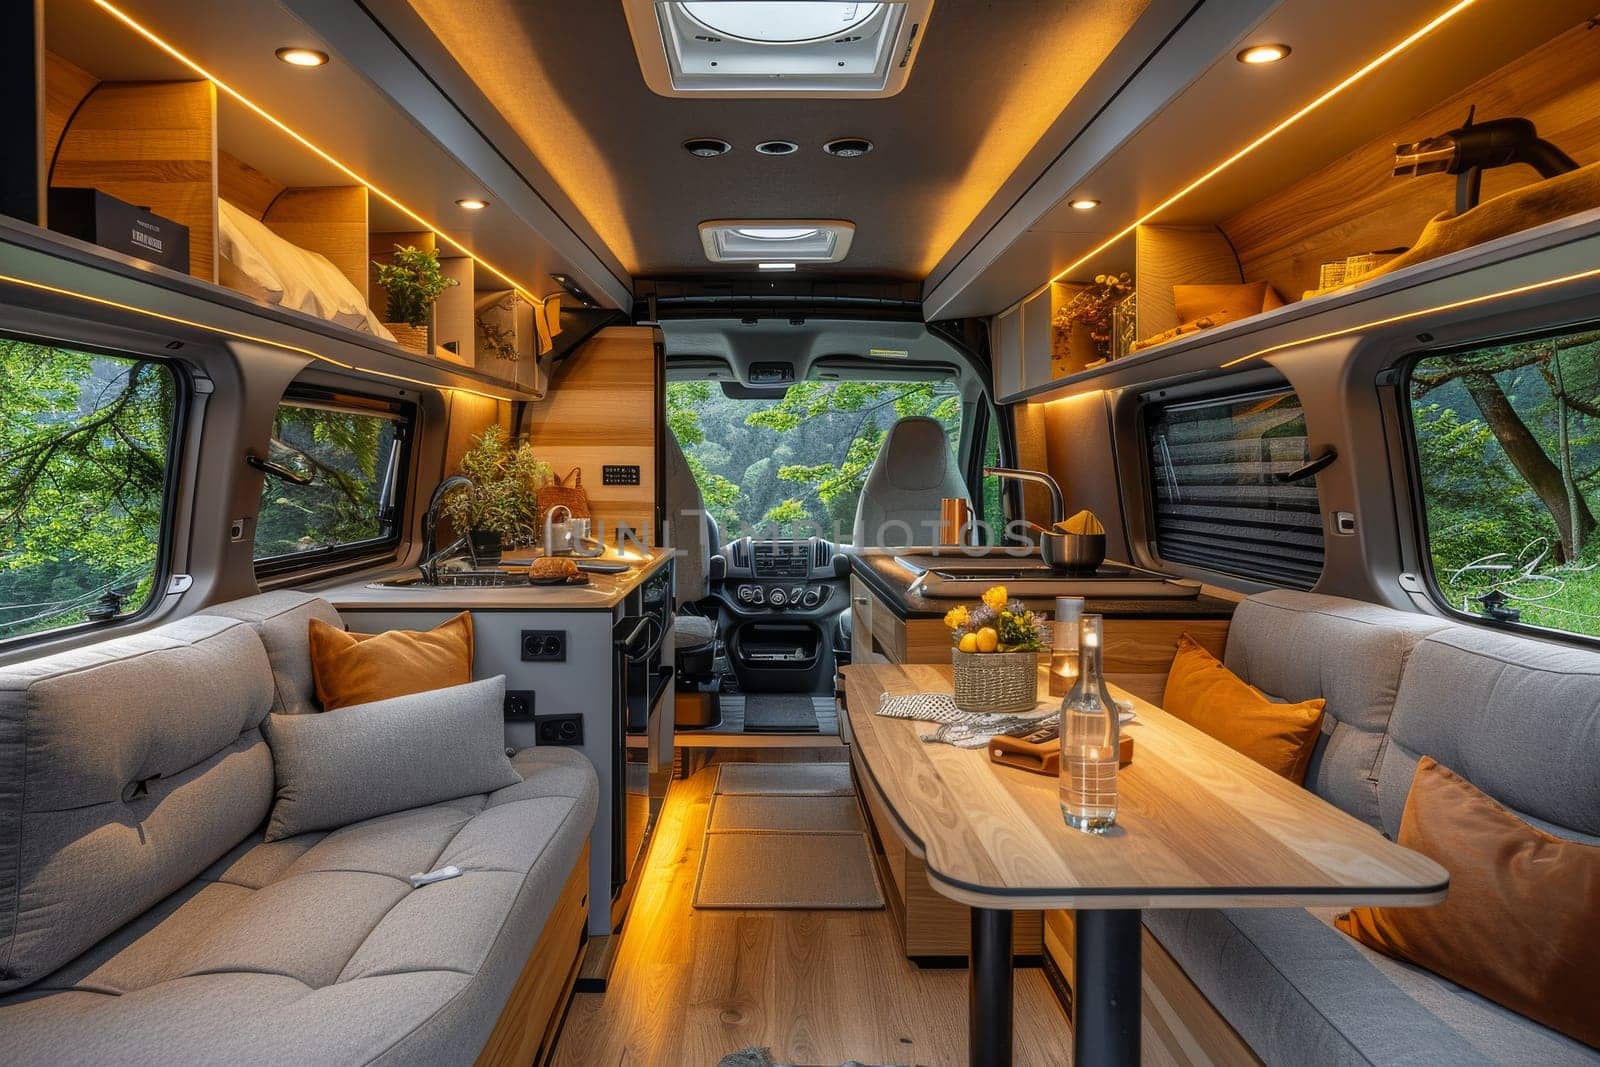 luxury living of camper van. camping concept by itchaznong